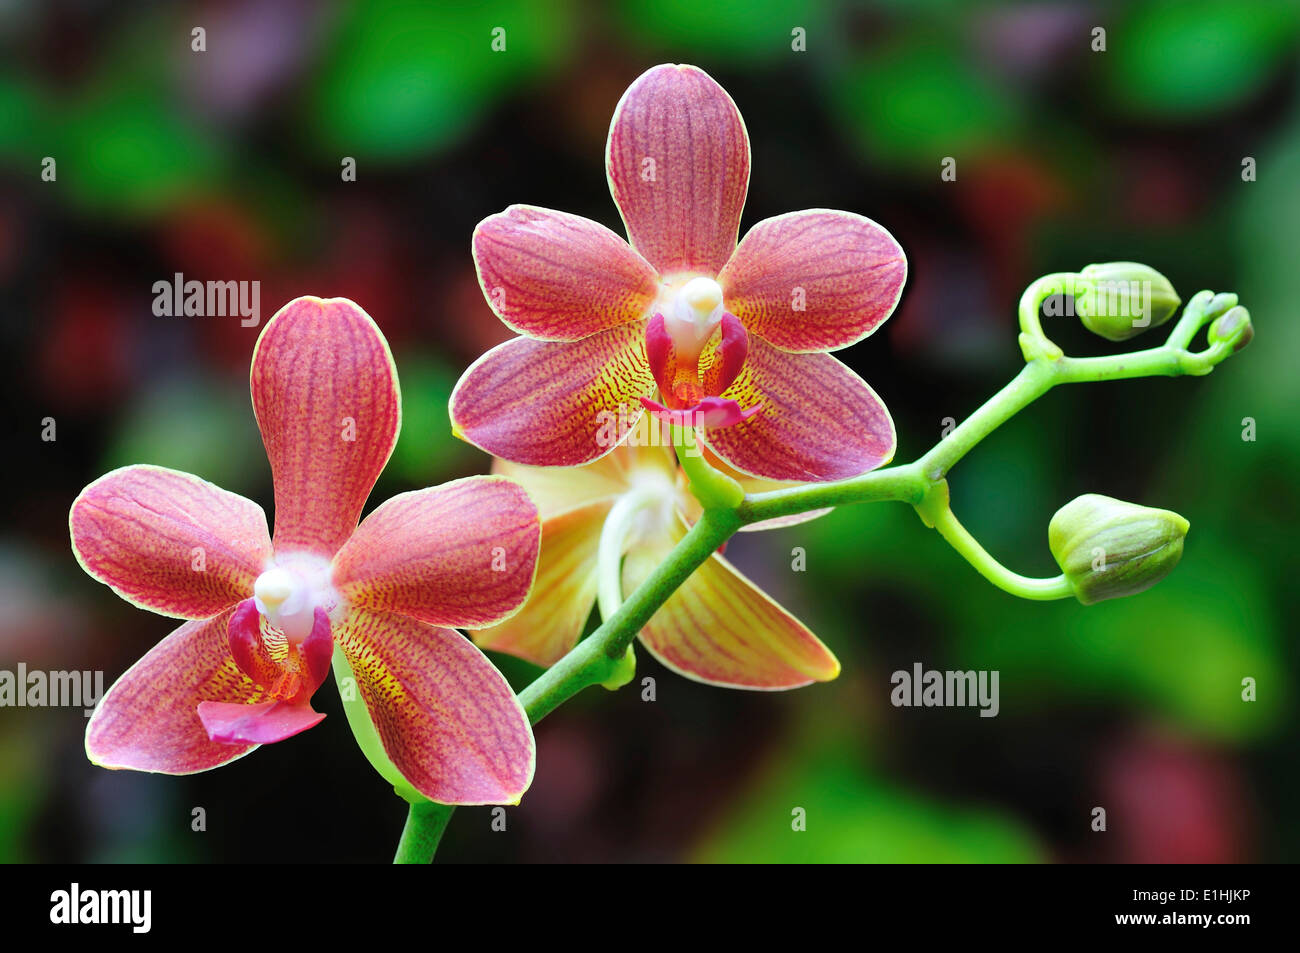 Red-brown orchid flowers (phalaenopsis) on branch with buds Stock Photo